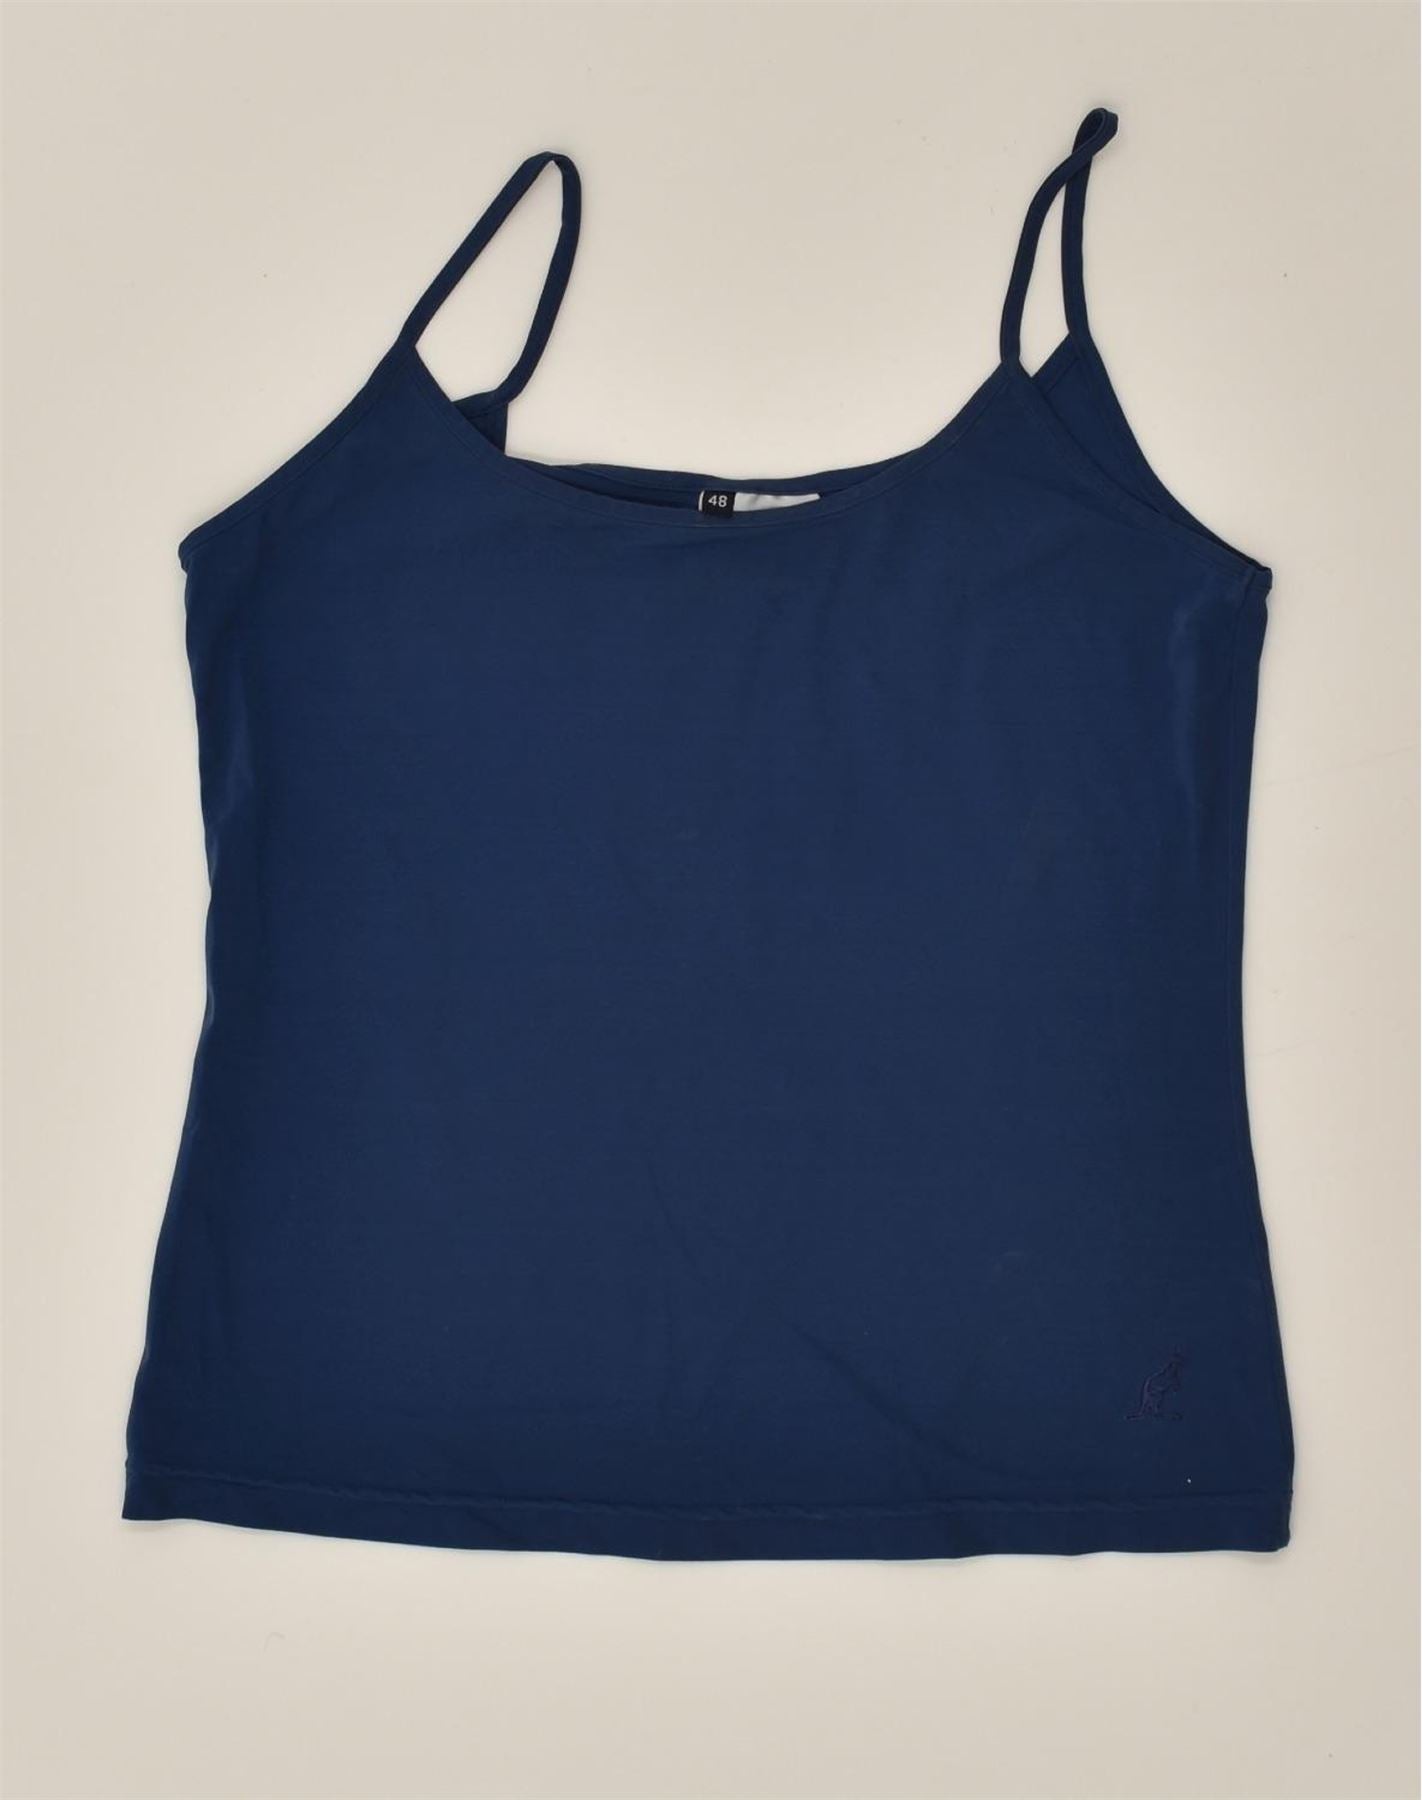 AUSTRALIAN Womens Cami Top IT 48 XL Navy Blue, Vintage & Second-Hand  Clothing Online